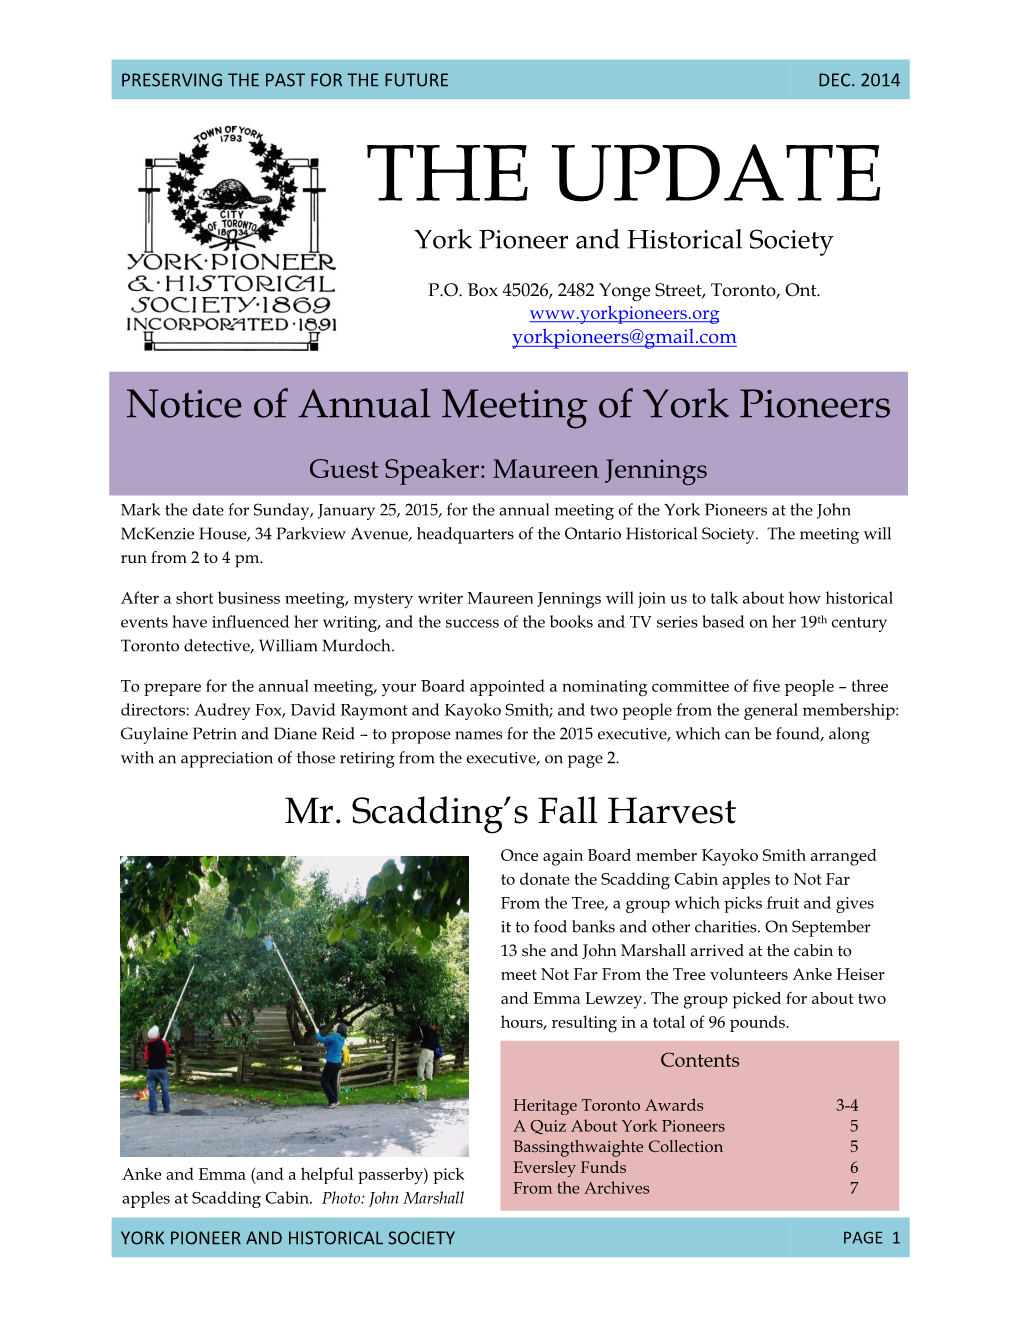 THE UPDATE York Pioneer and Historical Society